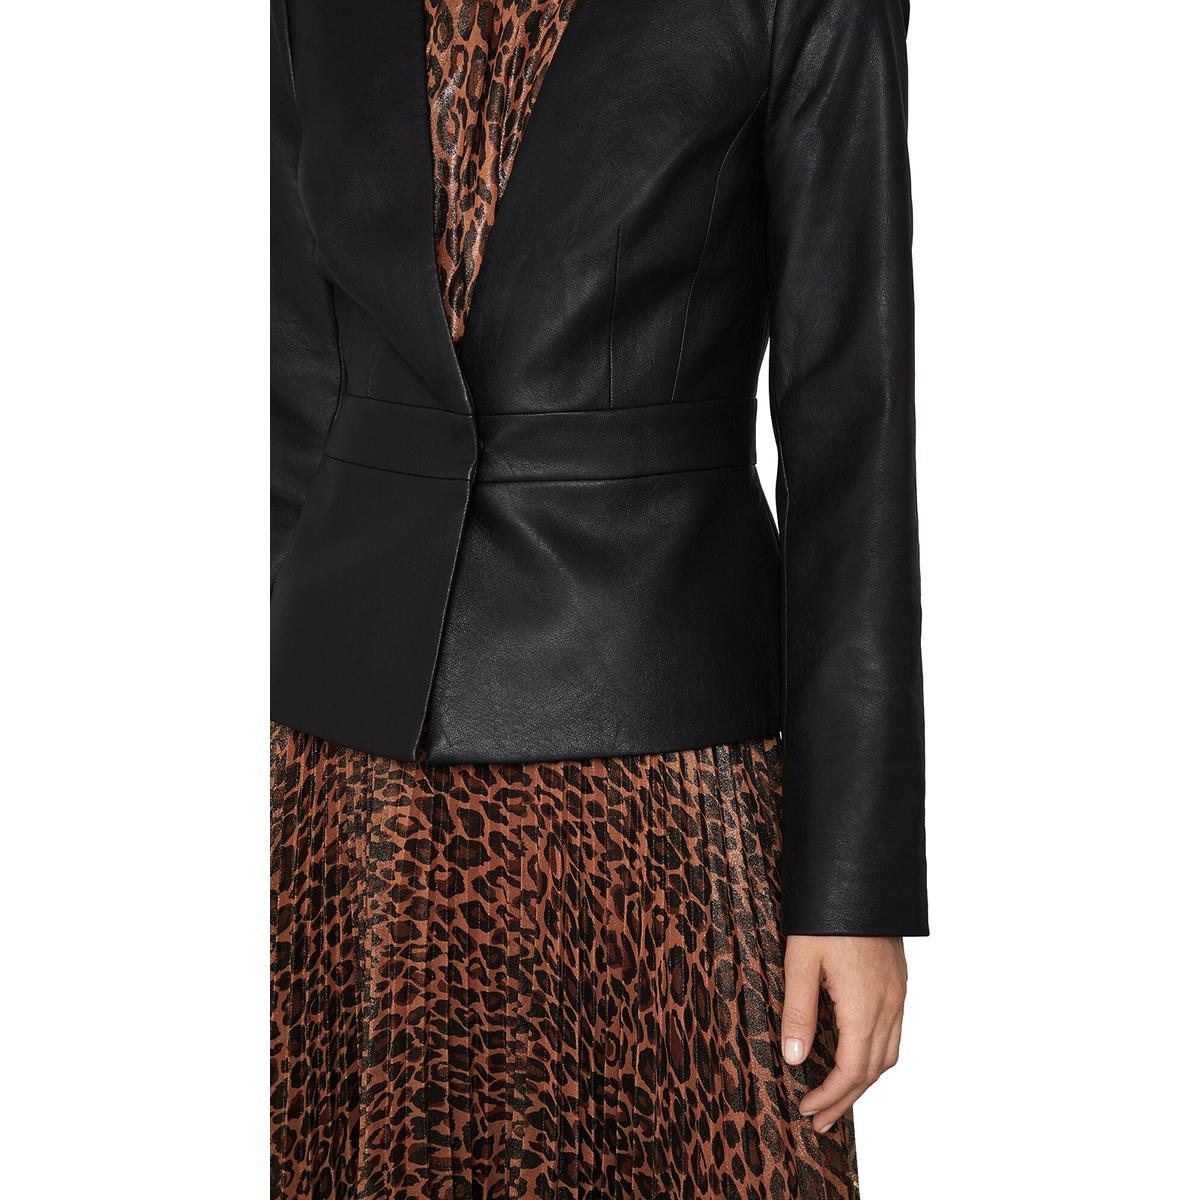 BCBG Womens Faux Leather Cropped Jacket